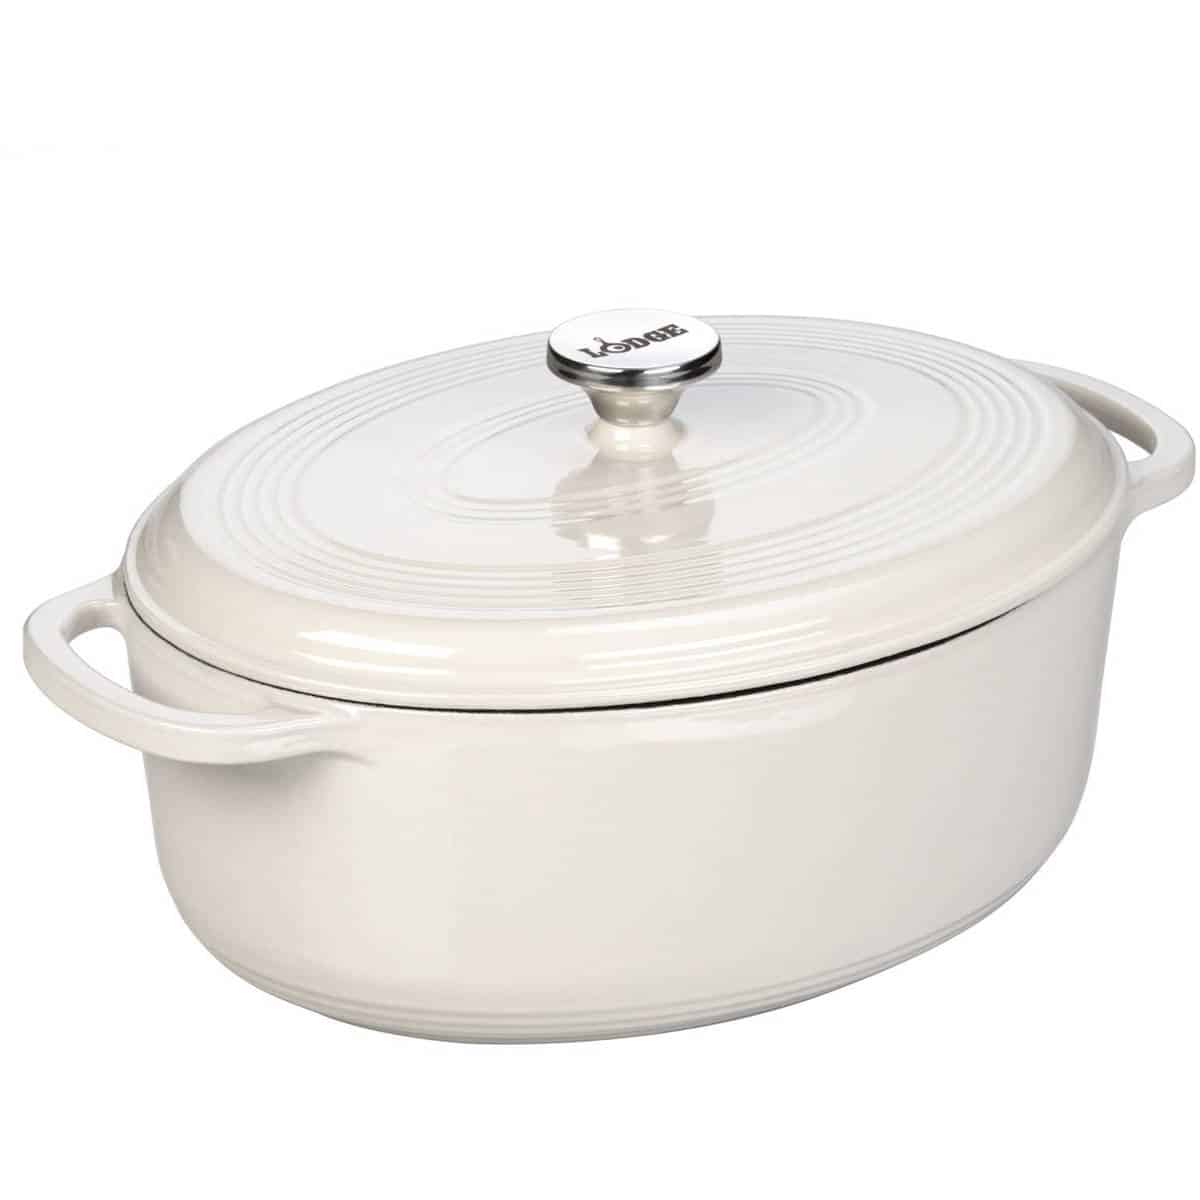 Lodge 7 Qt Enameled Cast Iron Oval Dutch Oven in Oyster White EC70D13 - Walmart.com